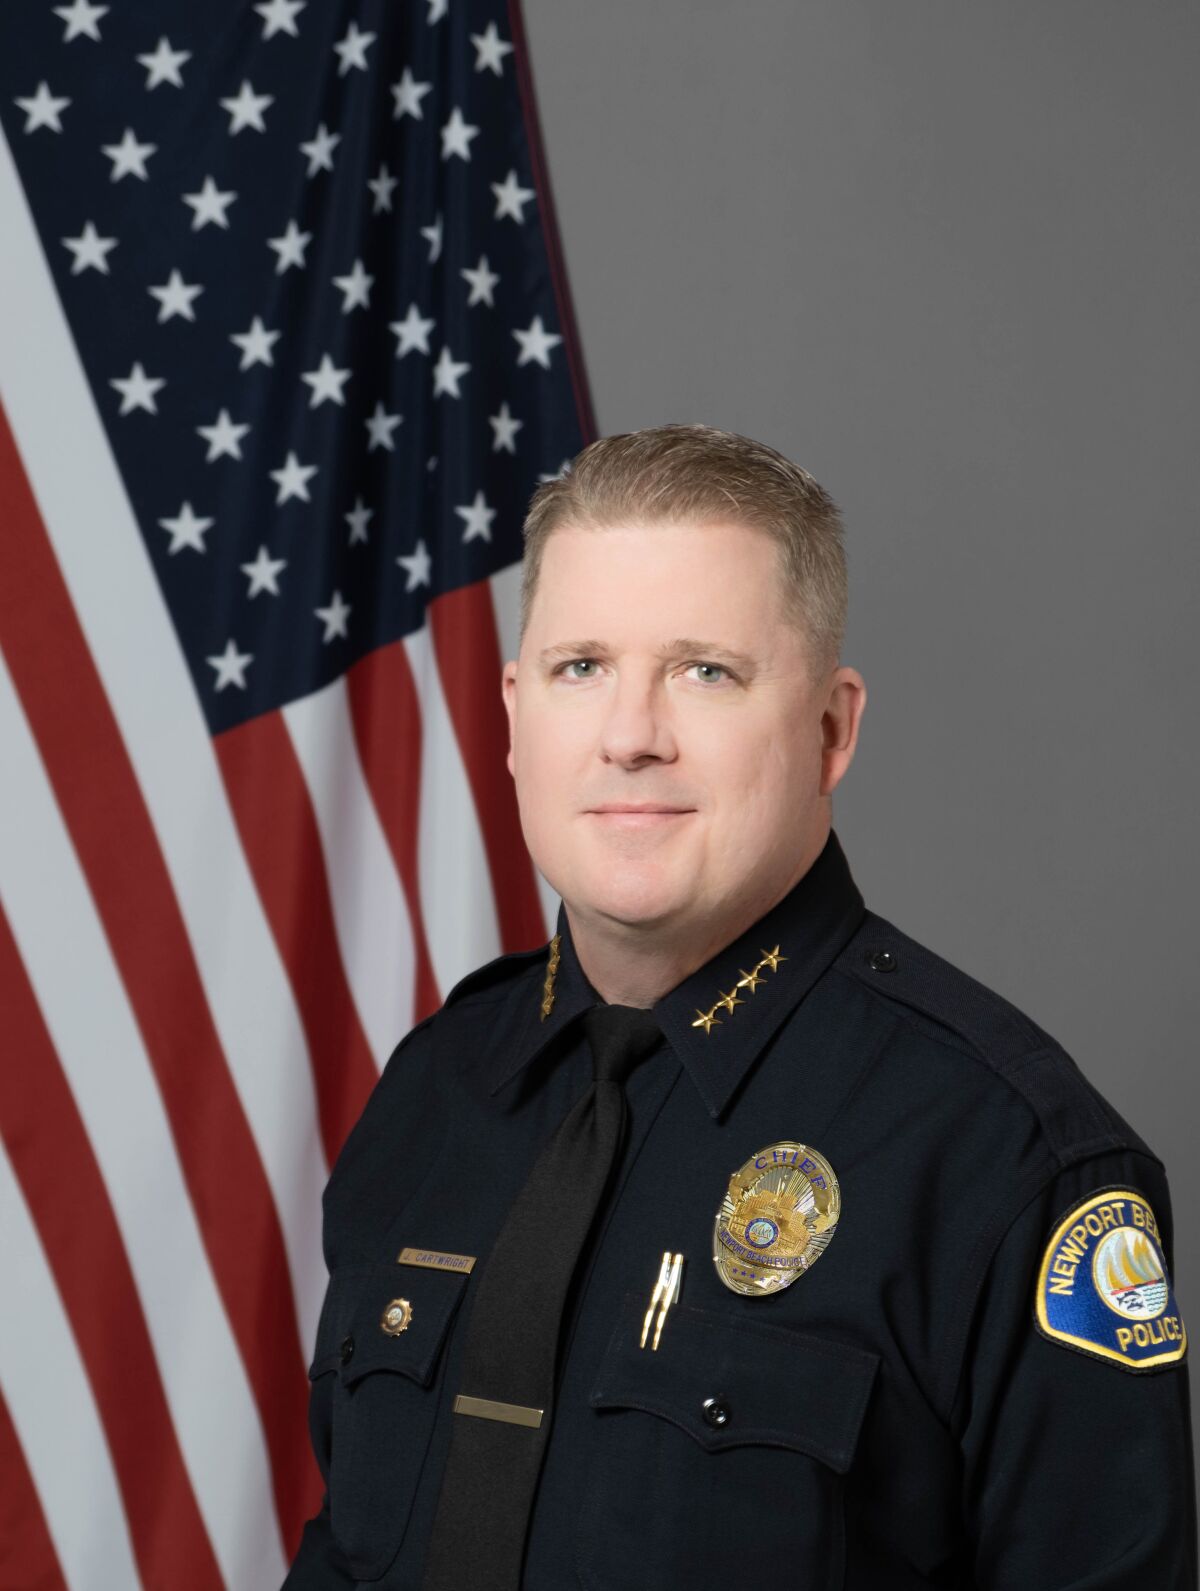 Joe Cartwright will be the 11th police chief in the Newport Beach Police Department's history.